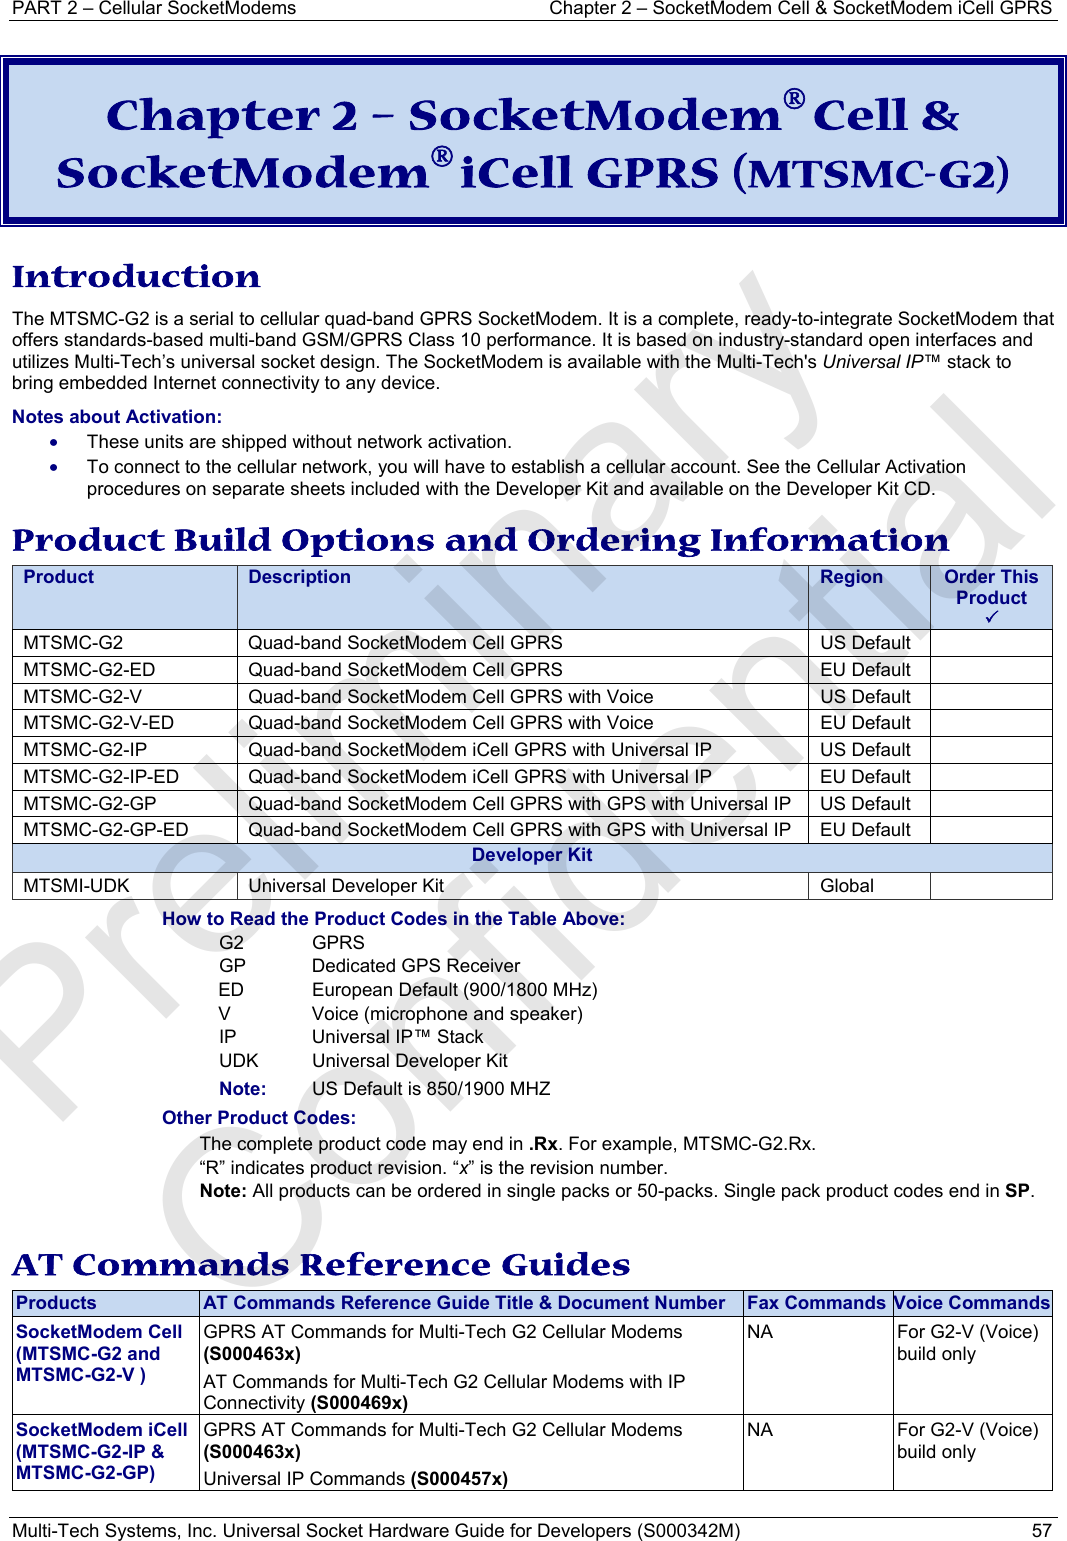 PART 2 – Cellular SocketModems   Chapter 2 – SocketModem Cell &amp; SocketModem iCell GPRS Multi-Tech Systems, Inc. Universal Socket Hardware Guide for Developers (S000342M)  57  Chapter 2 – SocketModem® Cell &amp; SocketModem® iCell GPRS (MTSMC-G2)  Introduction The MTSMC-G2 is a serial to cellular quad-band GPRS SocketModem. It is a complete, ready-to-integrate SocketModem that offers standards-based multi-band GSM/GPRS Class 10 performance. It is based on industry-standard open interfaces and utilizes Multi-Tech’s universal socket design. The SocketModem is available with the Multi-Tech&apos;s Universal IP™ stack to bring embedded Internet connectivity to any device.  Notes about Activation:  • These units are shipped without network activation.  • To connect to the cellular network, you will have to establish a cellular account. See the Cellular Activation procedures on separate sheets included with the Developer Kit and available on the Developer Kit CD.  Product Build Options and Ordering Information Product  Description  Region  Order This Product 3MTSMC-G2  Quad-band SocketModem Cell GPRS  US Default   MTSMC-G2-ED  Quad-band SocketModem Cell GPRS  EU Default   MTSMC-G2-V  Quad-band SocketModem Cell GPRS with Voice   US Default   MTSMC-G2-V-ED  Quad-band SocketModem Cell GPRS with Voice   EU Default   MTSMC-G2-IP  Quad-band SocketModem iCell GPRS with Universal IP   US Default   MTSMC-G2-IP-ED  Quad-band SocketModem iCell GPRS with Universal IP   EU Default   MTSMC-G2-GP  Quad-band SocketModem Cell GPRS with GPS with Universal IP  US Default   MTSMC-G2-GP-ED  Quad-band SocketModem Cell GPRS with GPS with Universal IP  EU Default   Developer KitMTSMI-UDK  Universal Developer Kit  Global   How to Read the Product Codes in the Table Above: G2 GPRS GP  Dedicated GPS Receiver ED  European Default (900/1800 MHz)   V  Voice (microphone and speaker) IP  Universal IP™ Stack  UDK  Universal Developer Kit Note:   US Default is 850/1900 MHZ Other Product Codes: The complete product code may end in .Rx. For example, MTSMC-G2.Rx.   “R” indicates product revision. “x” is the revision number. Note: All products can be ordered in single packs or 50-packs. Single pack product codes end in SP.  AT Commands Reference Guides Products  AT Commands Reference Guide Title &amp; Document Number  Fax Commands Voice CommandsSocketModem Cell (MTSMC-G2 and MTSMC-G2-V ) GPRS AT Commands for Multi-Tech G2 Cellular Modems (S000463x) AT Commands for Multi-Tech G2 Cellular Modems with IP Connectivity (S000469x) NA  For G2-V (Voice) build only  SocketModem iCell (MTSMC-G2-IP &amp; MTSMC-G2-GP) GPRS AT Commands for Multi-Tech G2 Cellular Modems (S000463x) Universal IP Commands (S000457x) NA  For G2-V (Voice) build only   Preliminary  Confidential